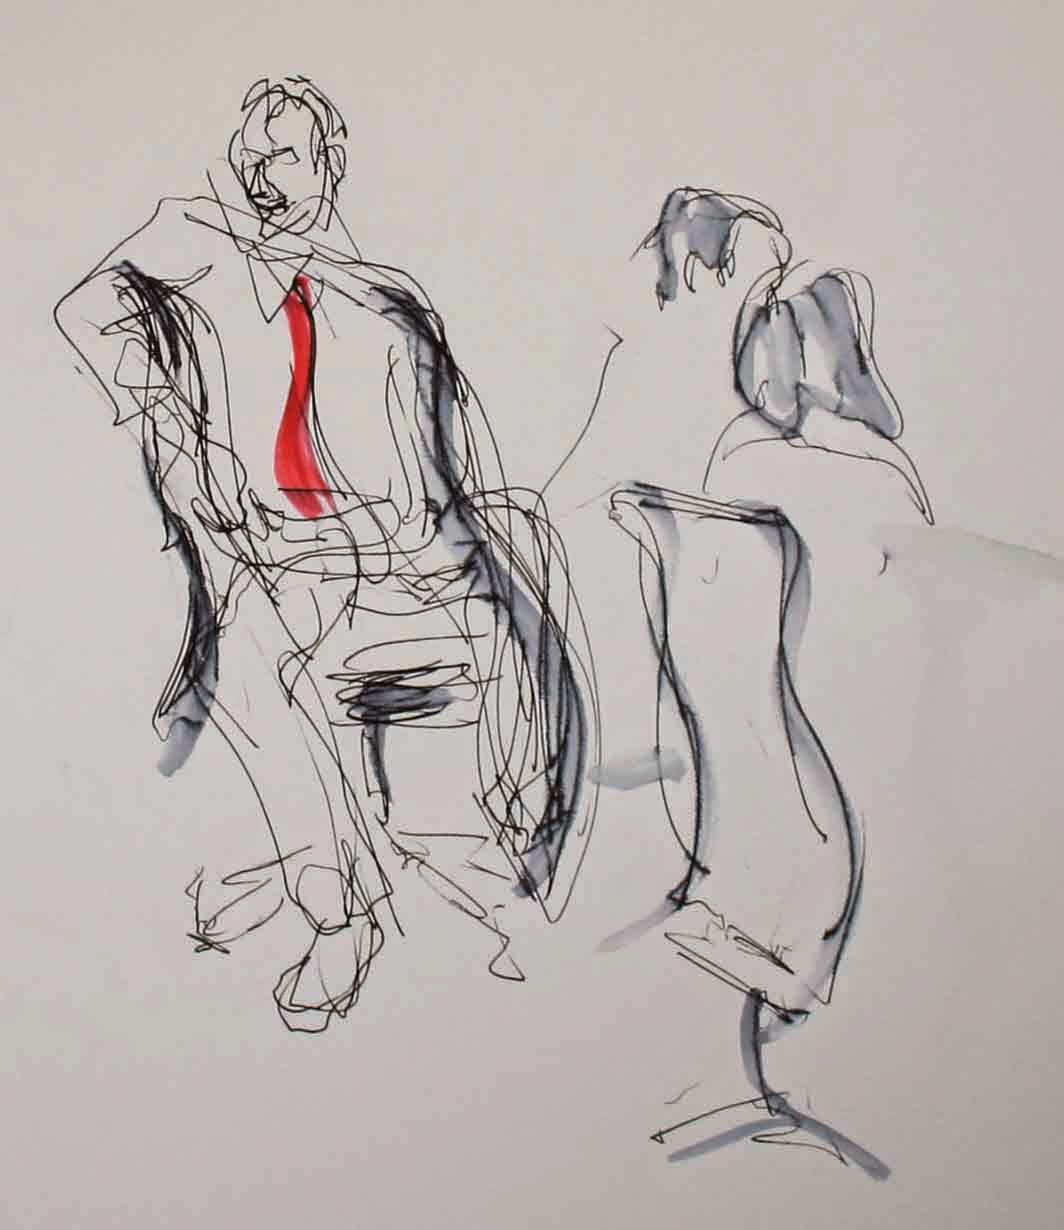 Sketches by Isobel Williams. http://isobelwilliams.blogspot.co.uk/